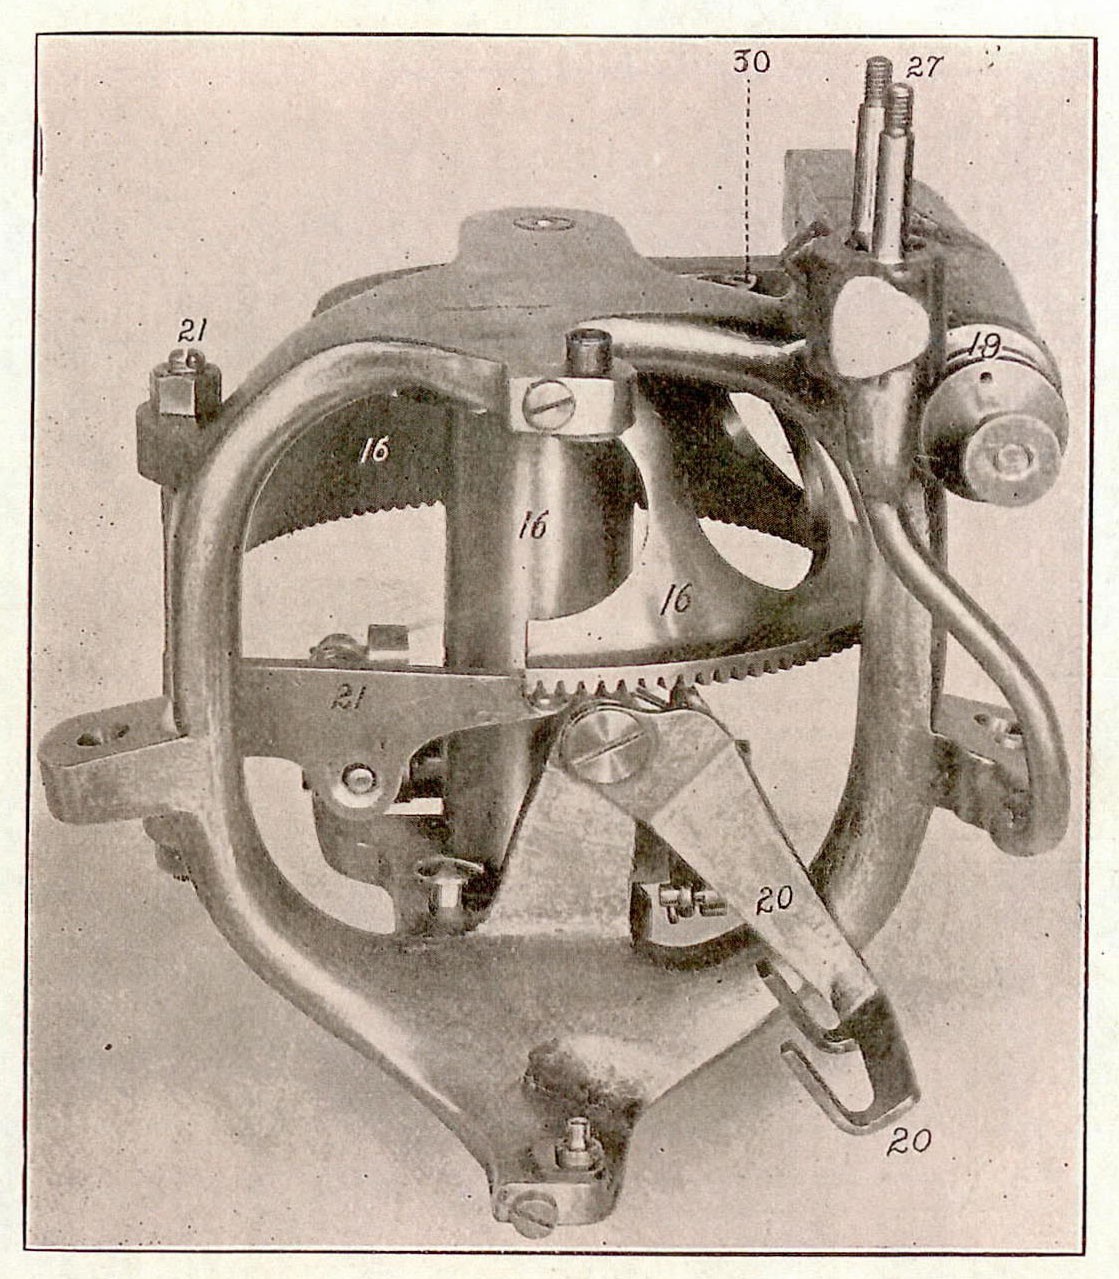 OBRY GEAR-Wheel and Rings Dismounted; also Impulse Spring and Rolling-Valve Removed.